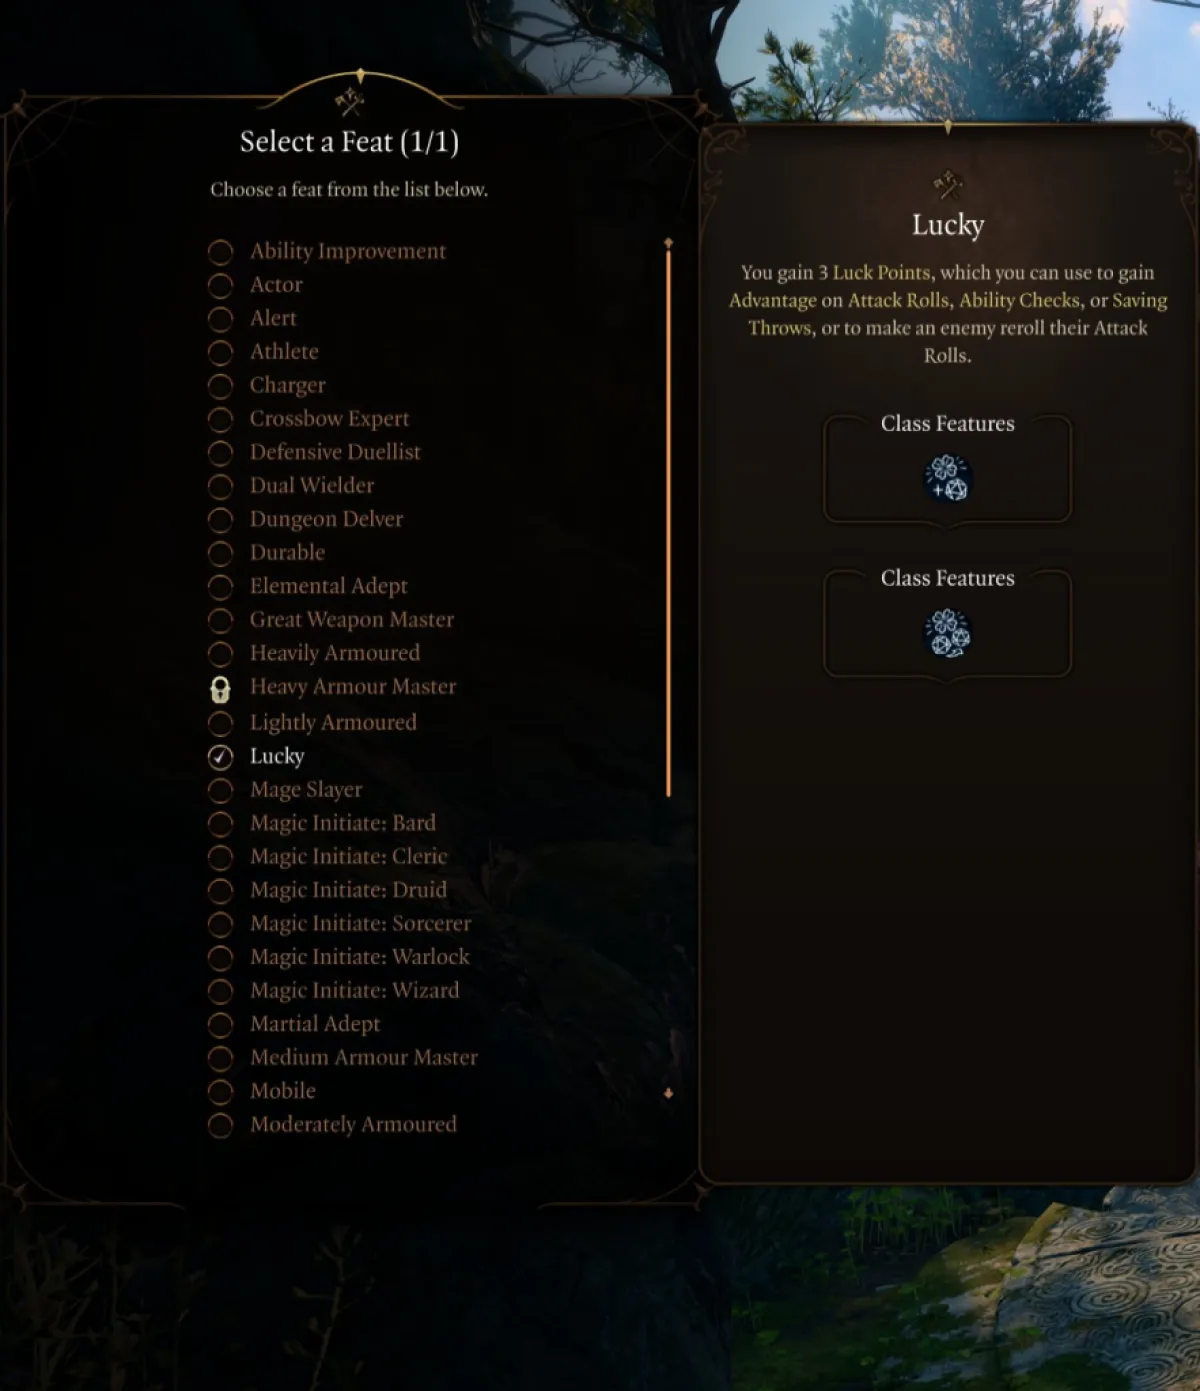 An image showing the Lucky feat in Baldur's Gate 3 BG3 as part of a best builds guide for Druids.